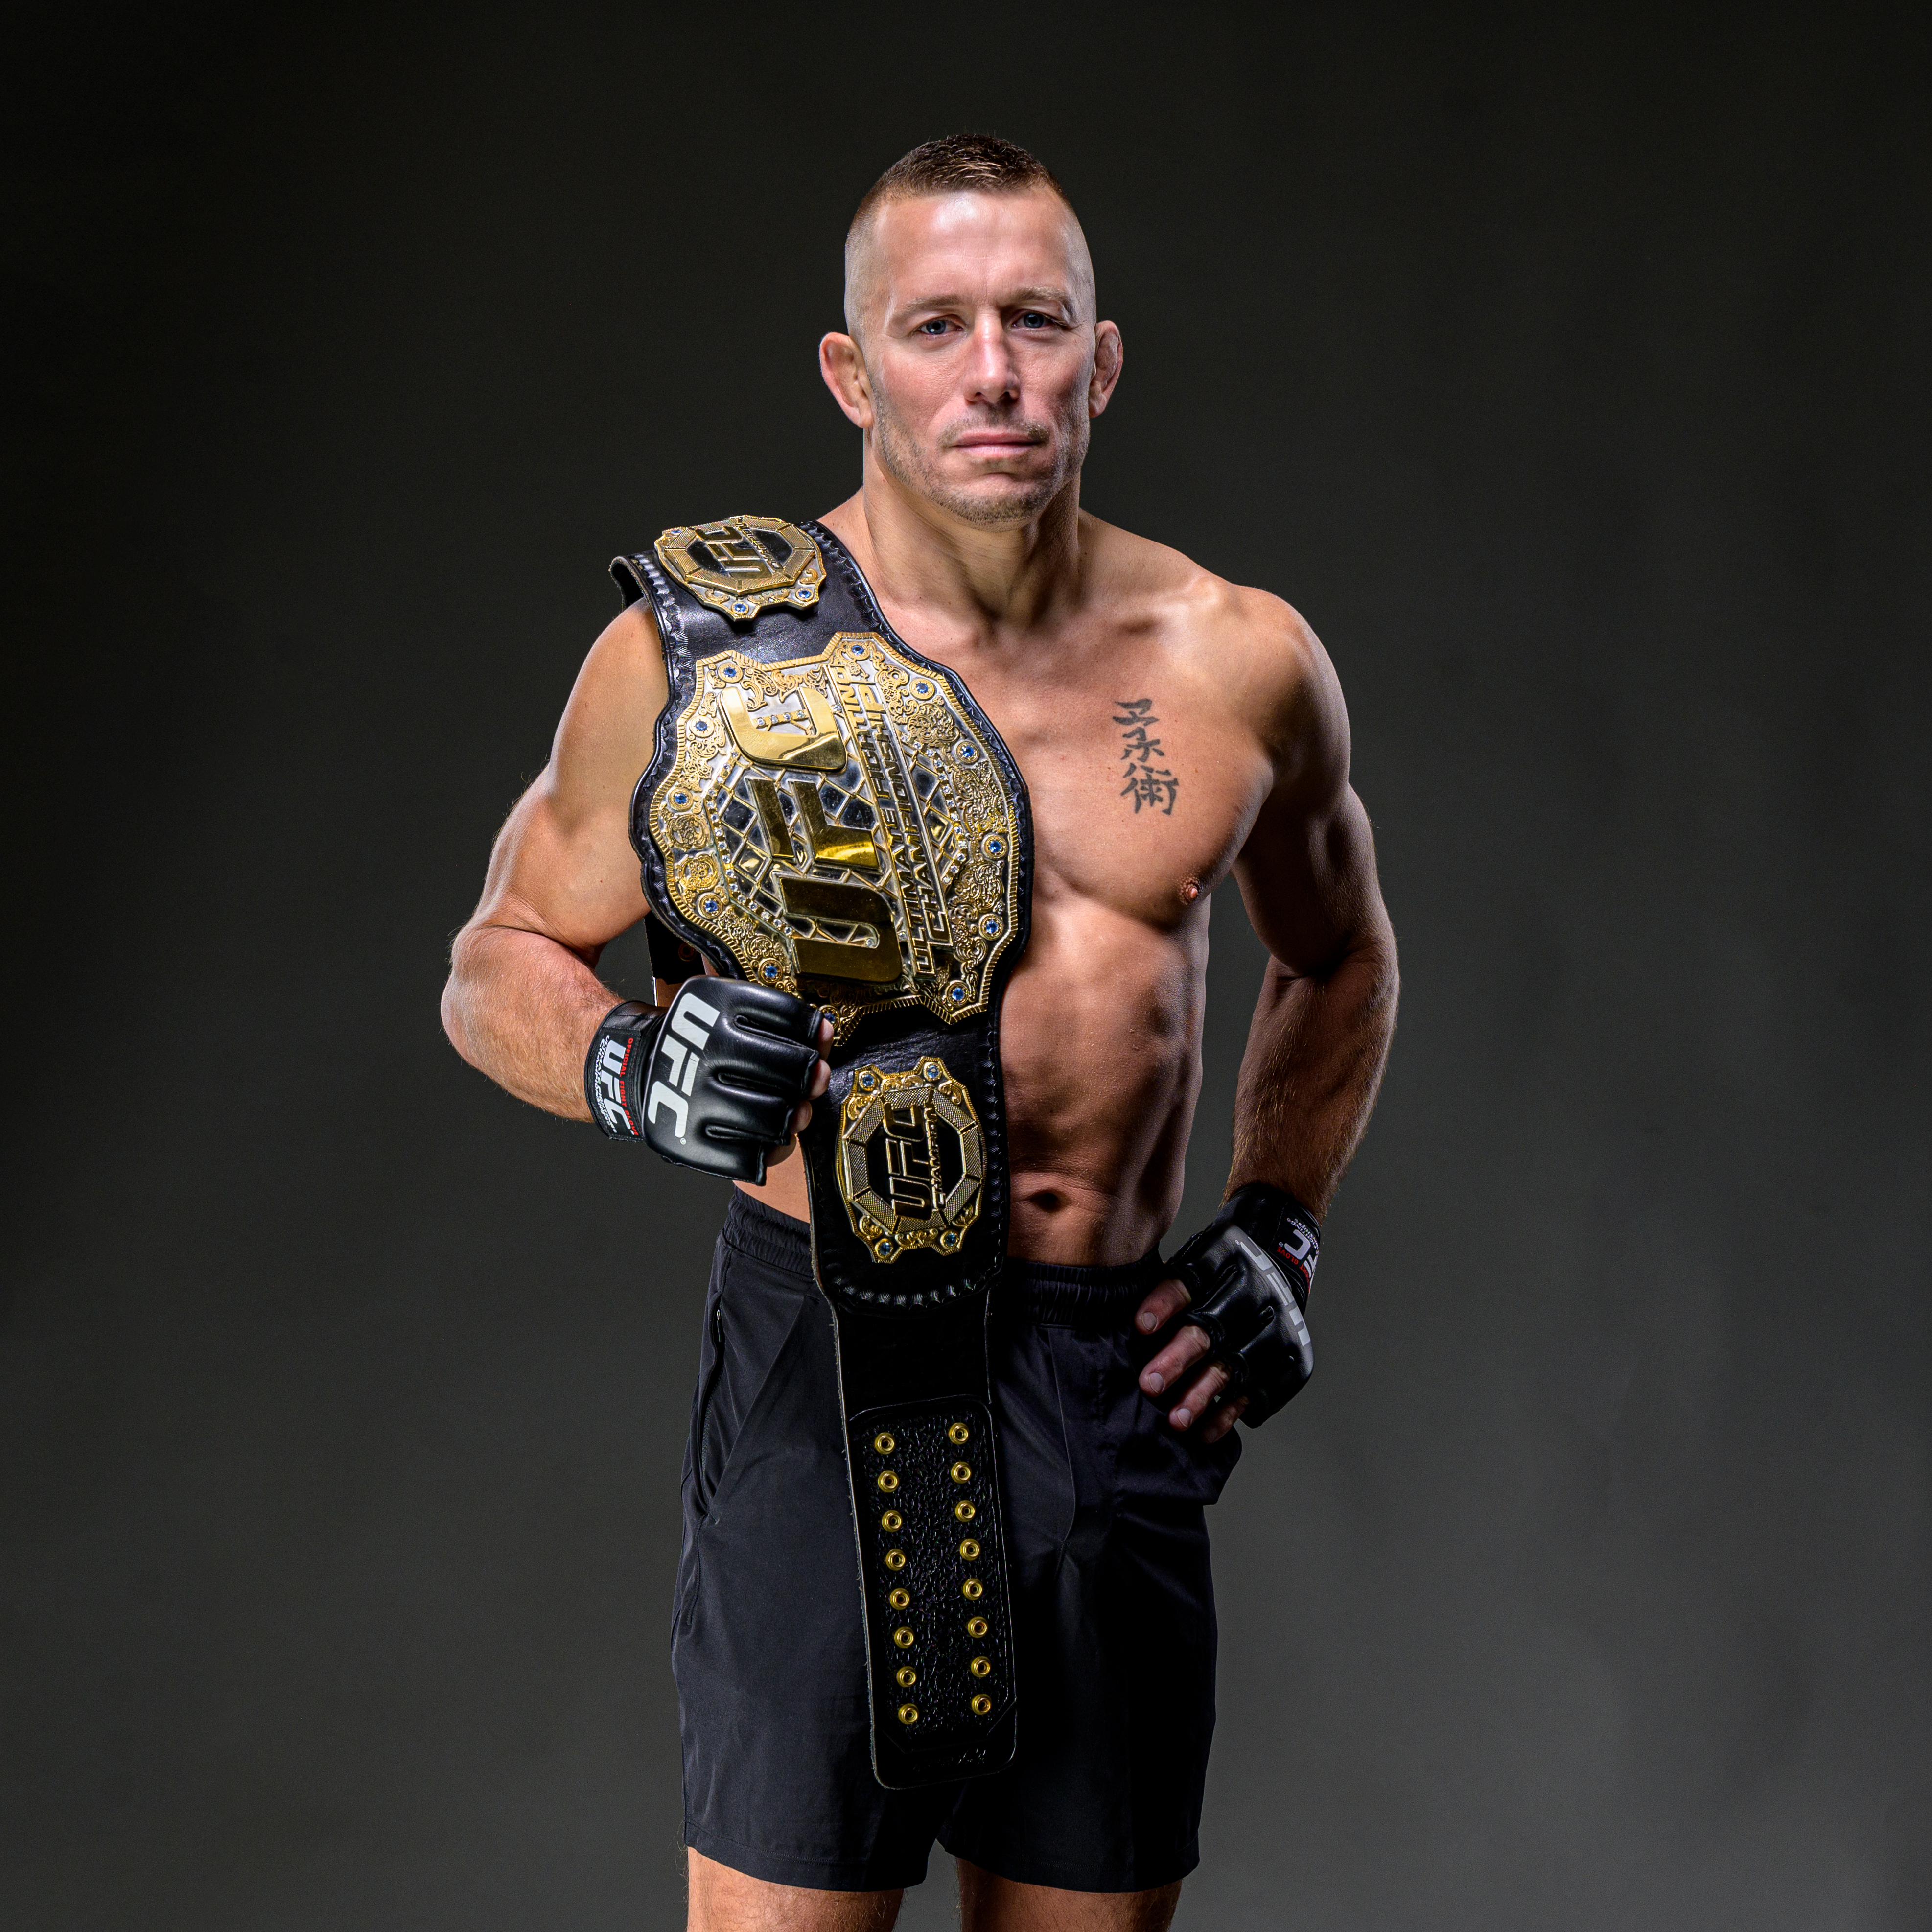 Hall of Famers Georges St-Pierre